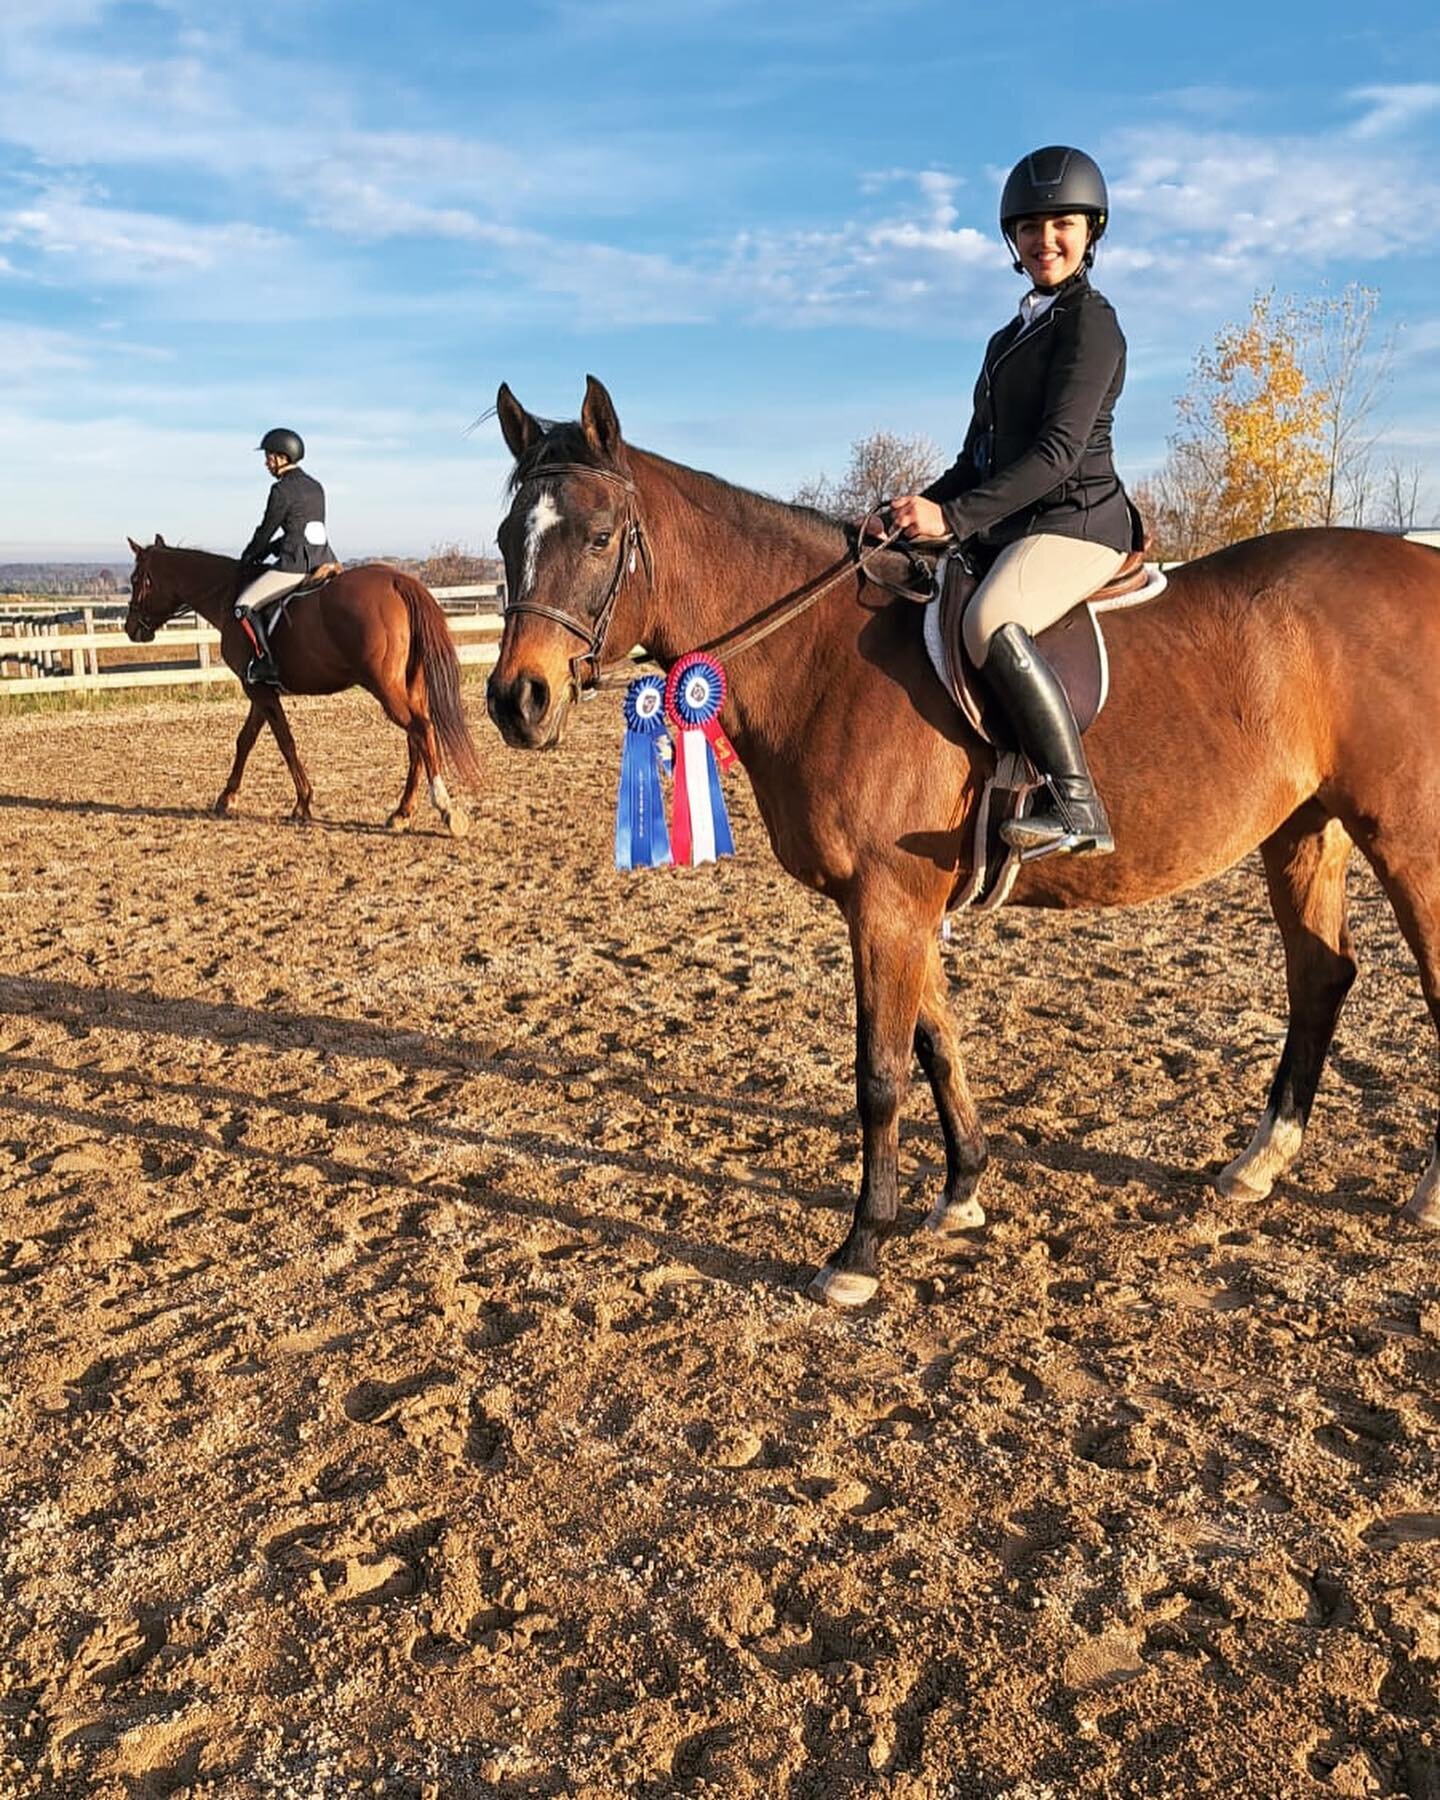 (Post 2/2) Congratulations to all of our riders that participated in our Halloween show today! It was a beautiful fall day filled with great riding, fun games, and awesome costumes! 

Thank you to everyone that participated or came out to watch, and 